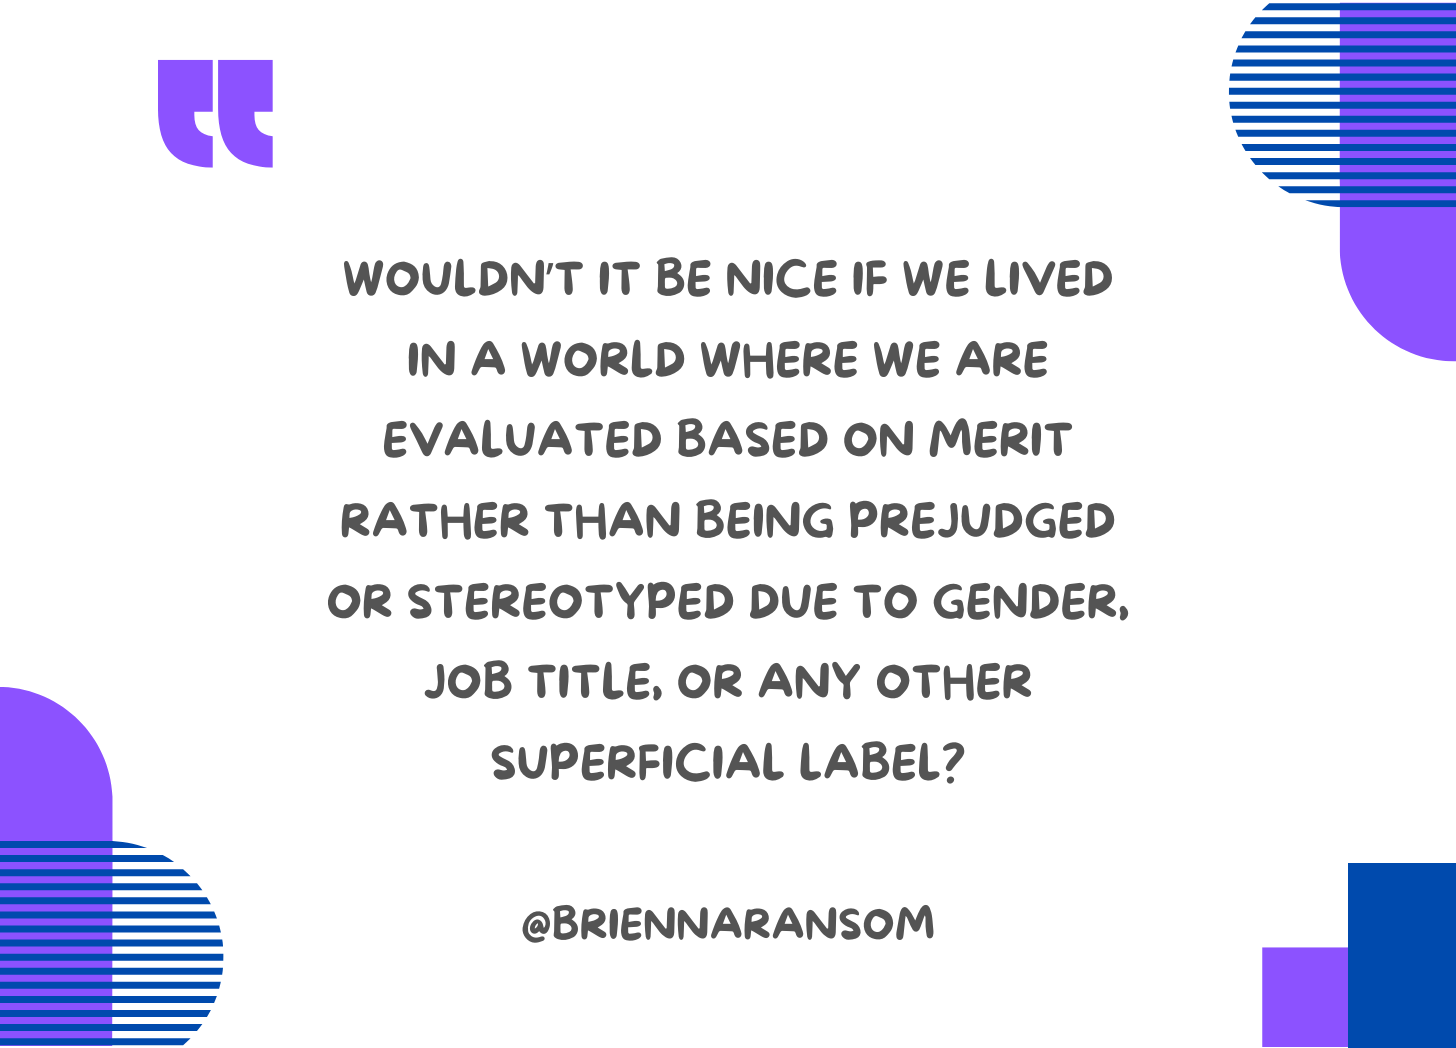 Wouldn’t it be nice if we lived in a world where we are evaluated based on merit rather than being prejudged or stereotyped due to gender, job title, or any other superficial label?